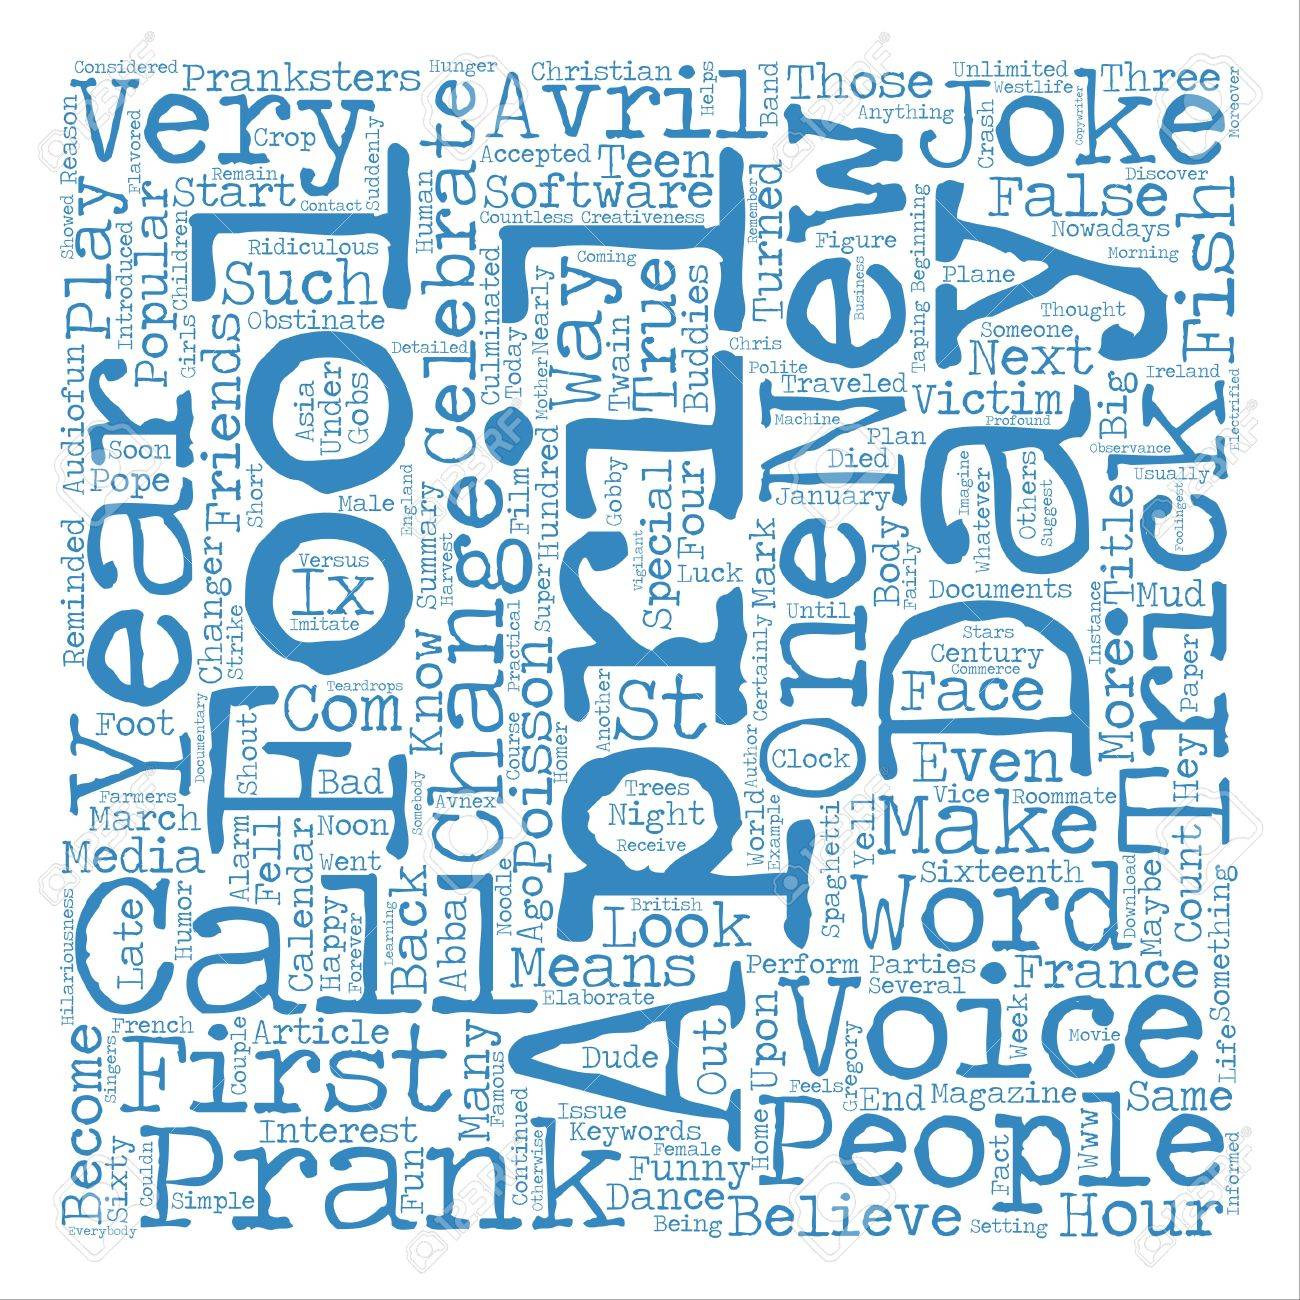 Pranks April Fools Day Text Background Word Cloud Concept Royalty